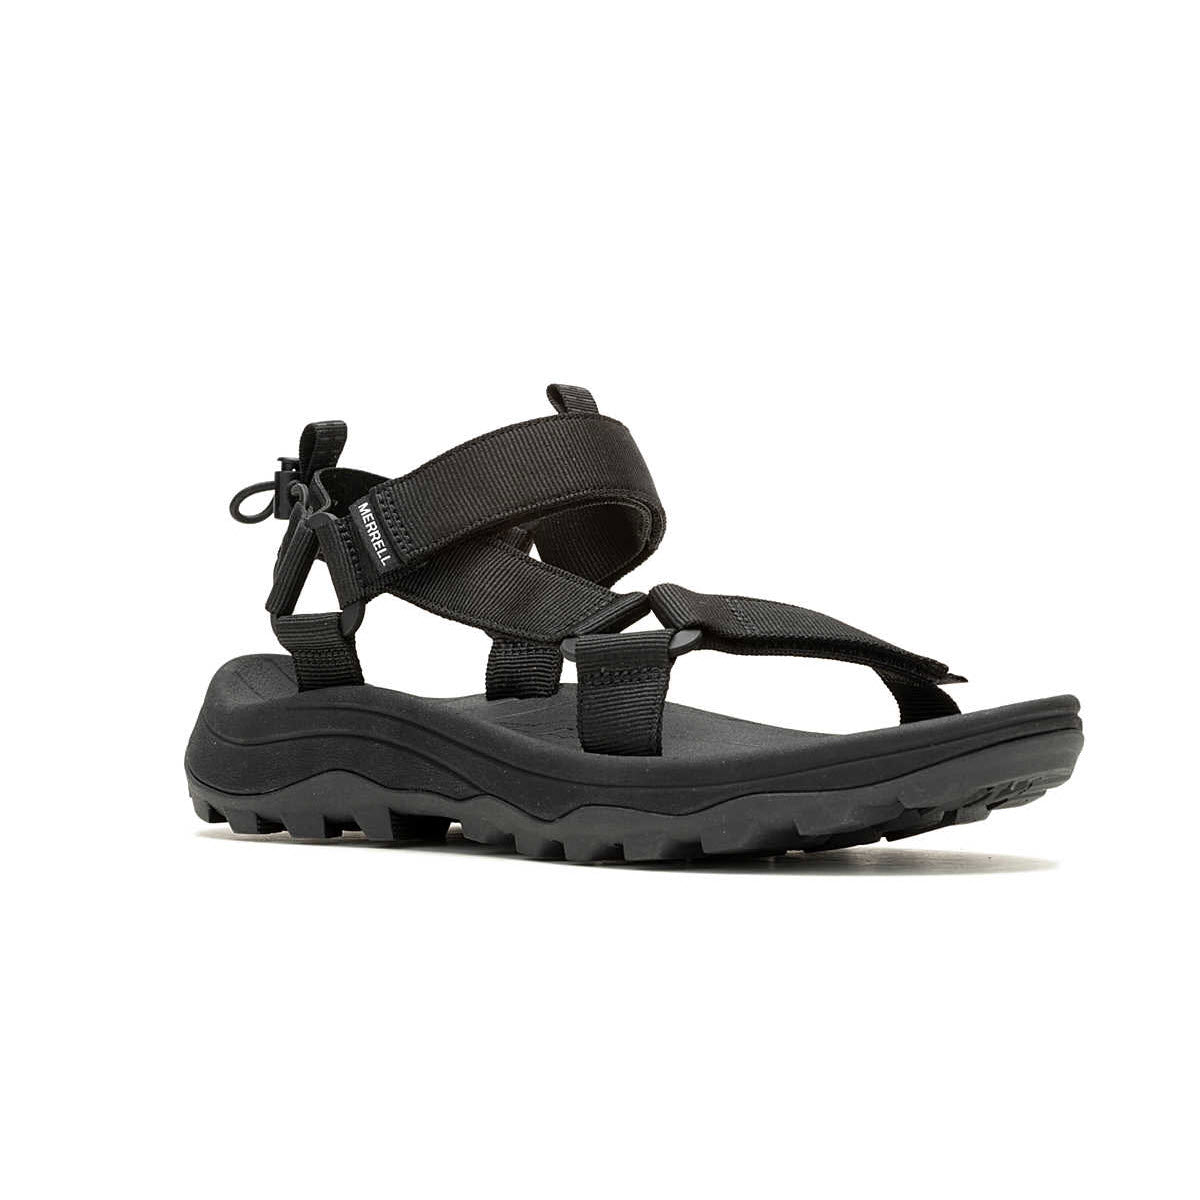 A single black Merrell Speed Fusion Web Sport sandal with adjustable straps and a thick, rugged sole, isolated on a white background.